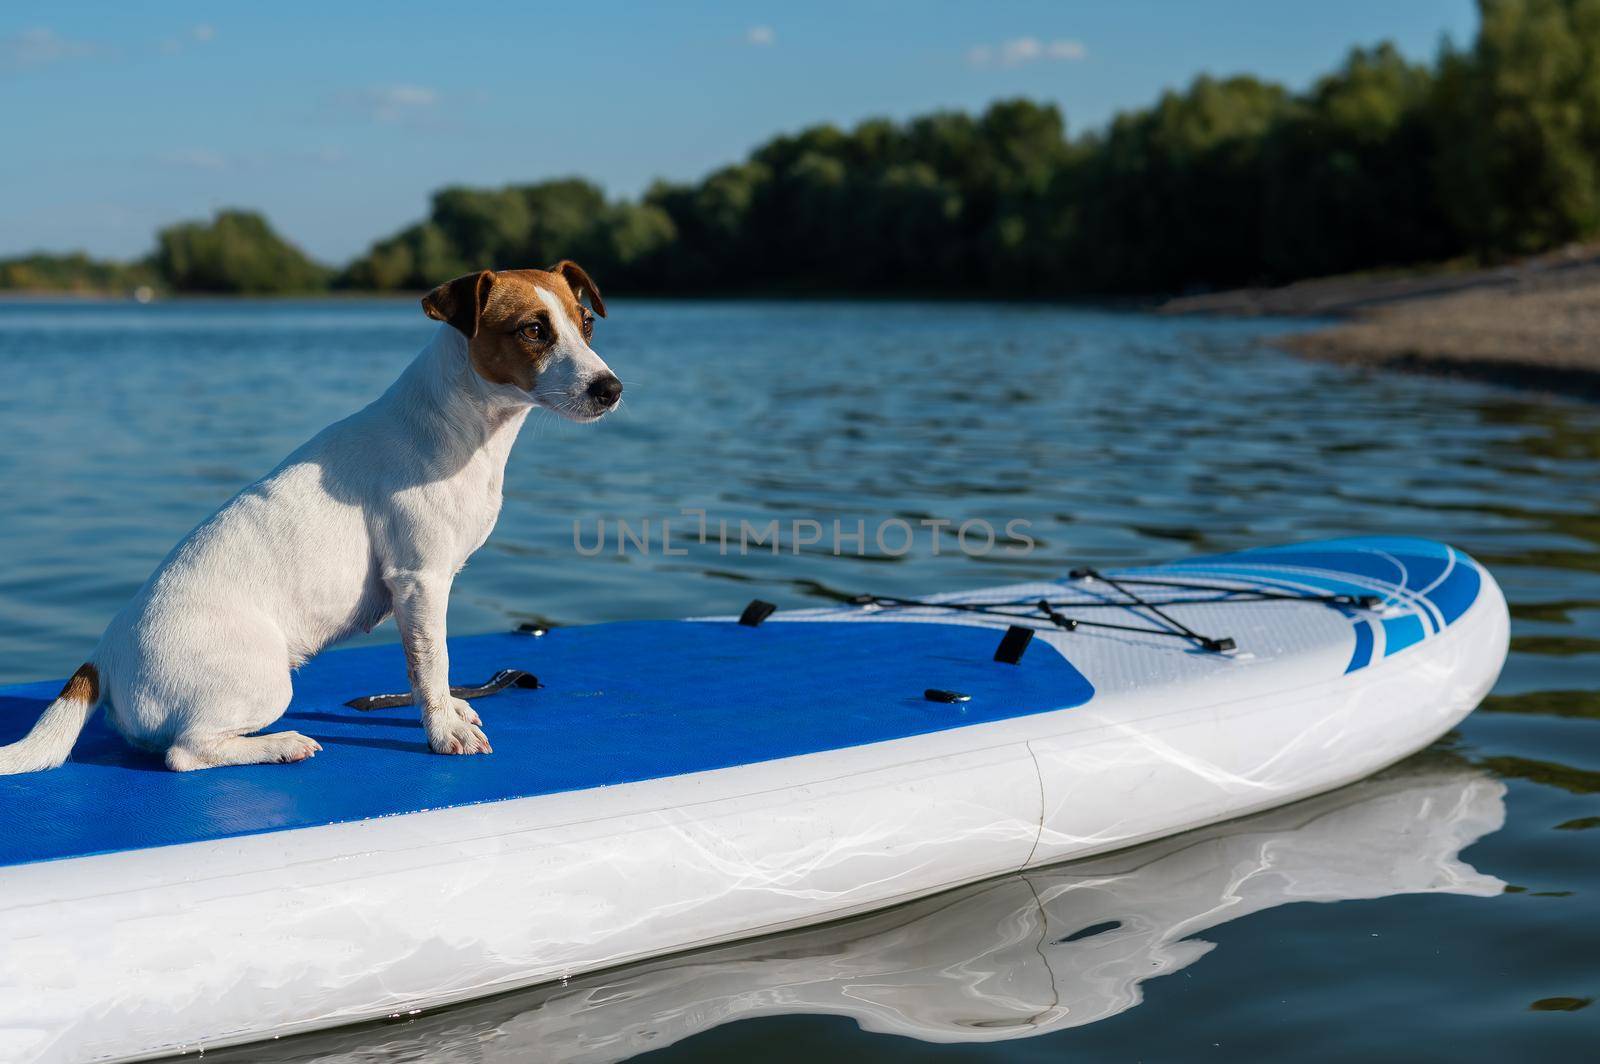 Jack russell terrier dog on a sup board. Summer sport by mrwed54